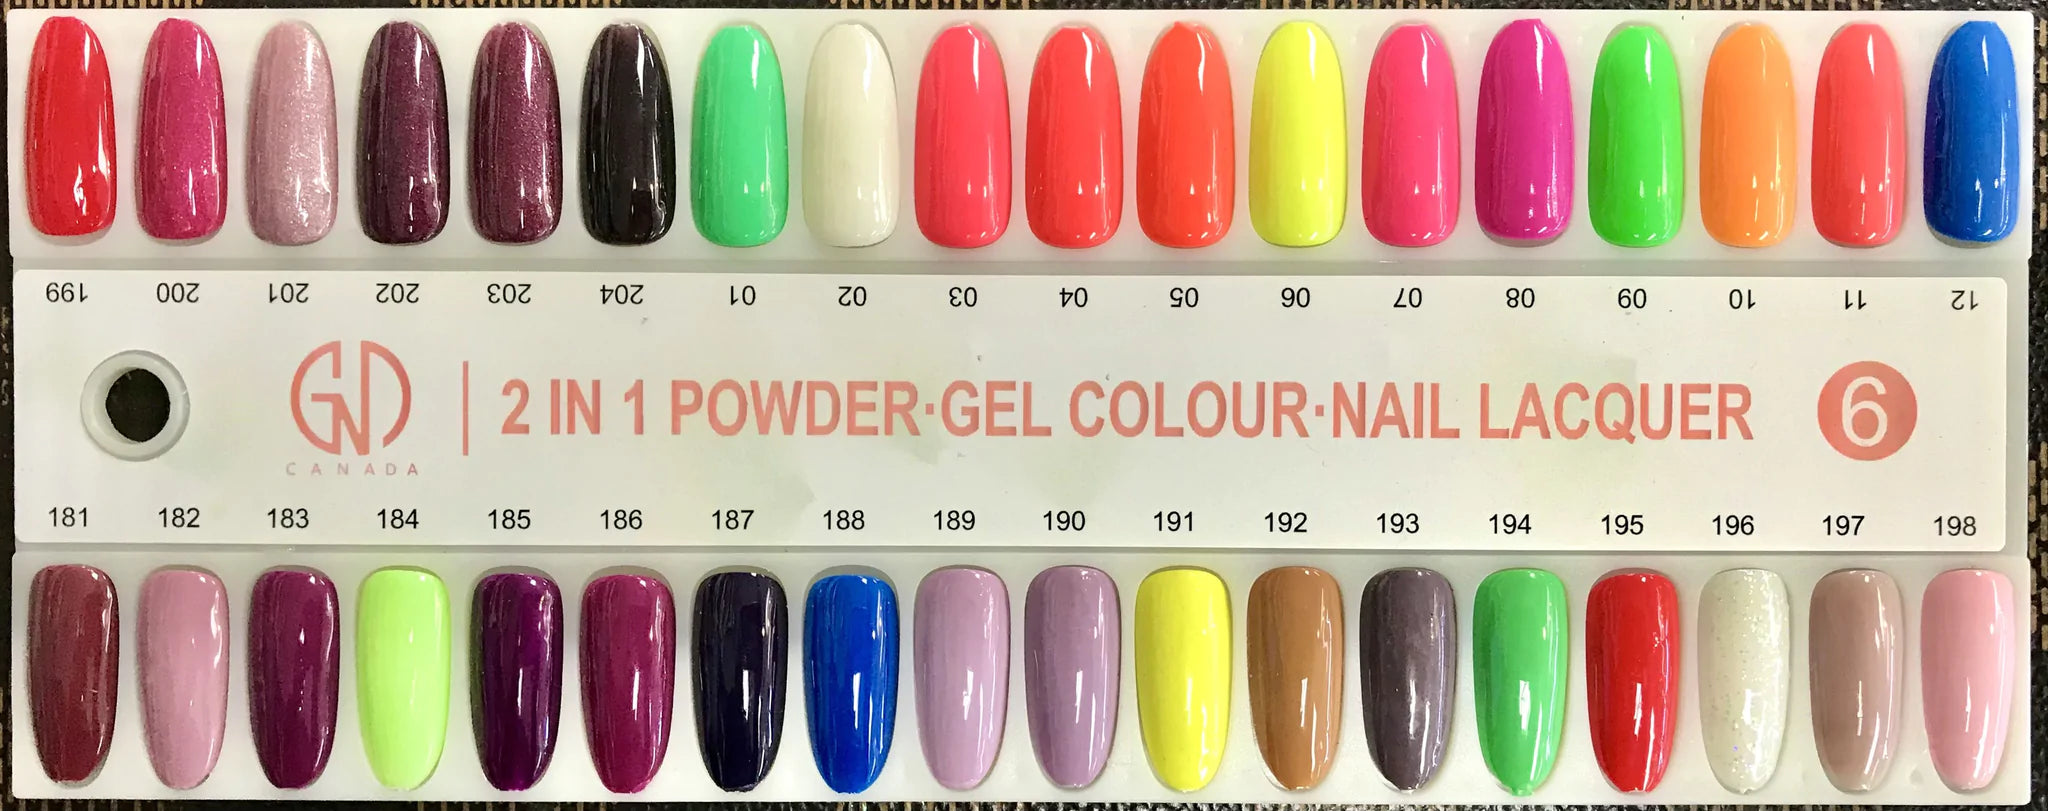 GND Duo Gel & Lacquer 201